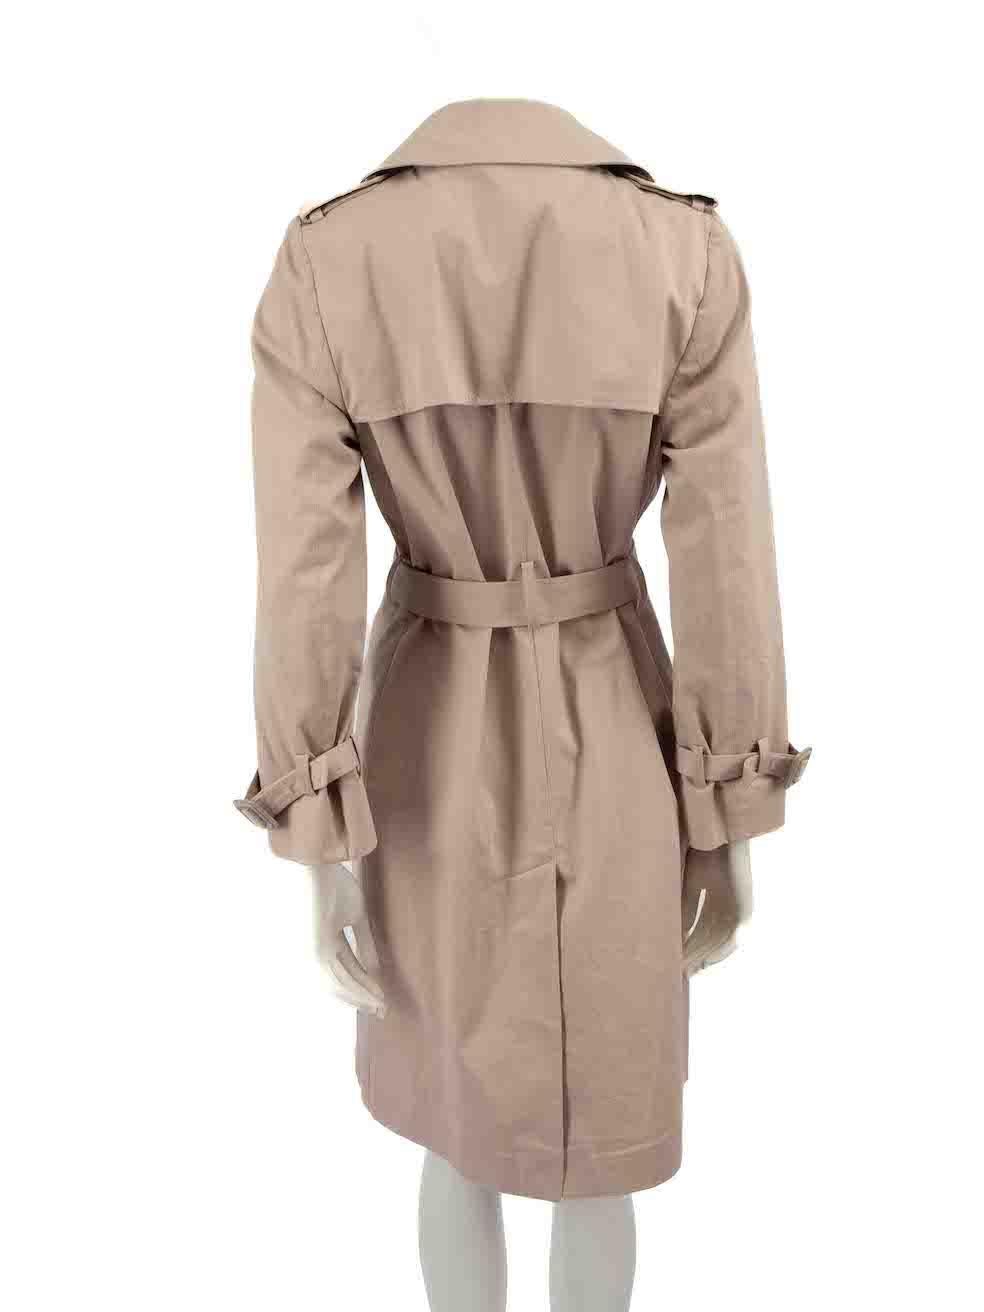 Maison Margiela Beige Double Breast Trench Coat Size M In Excellent Condition For Sale In London, GB